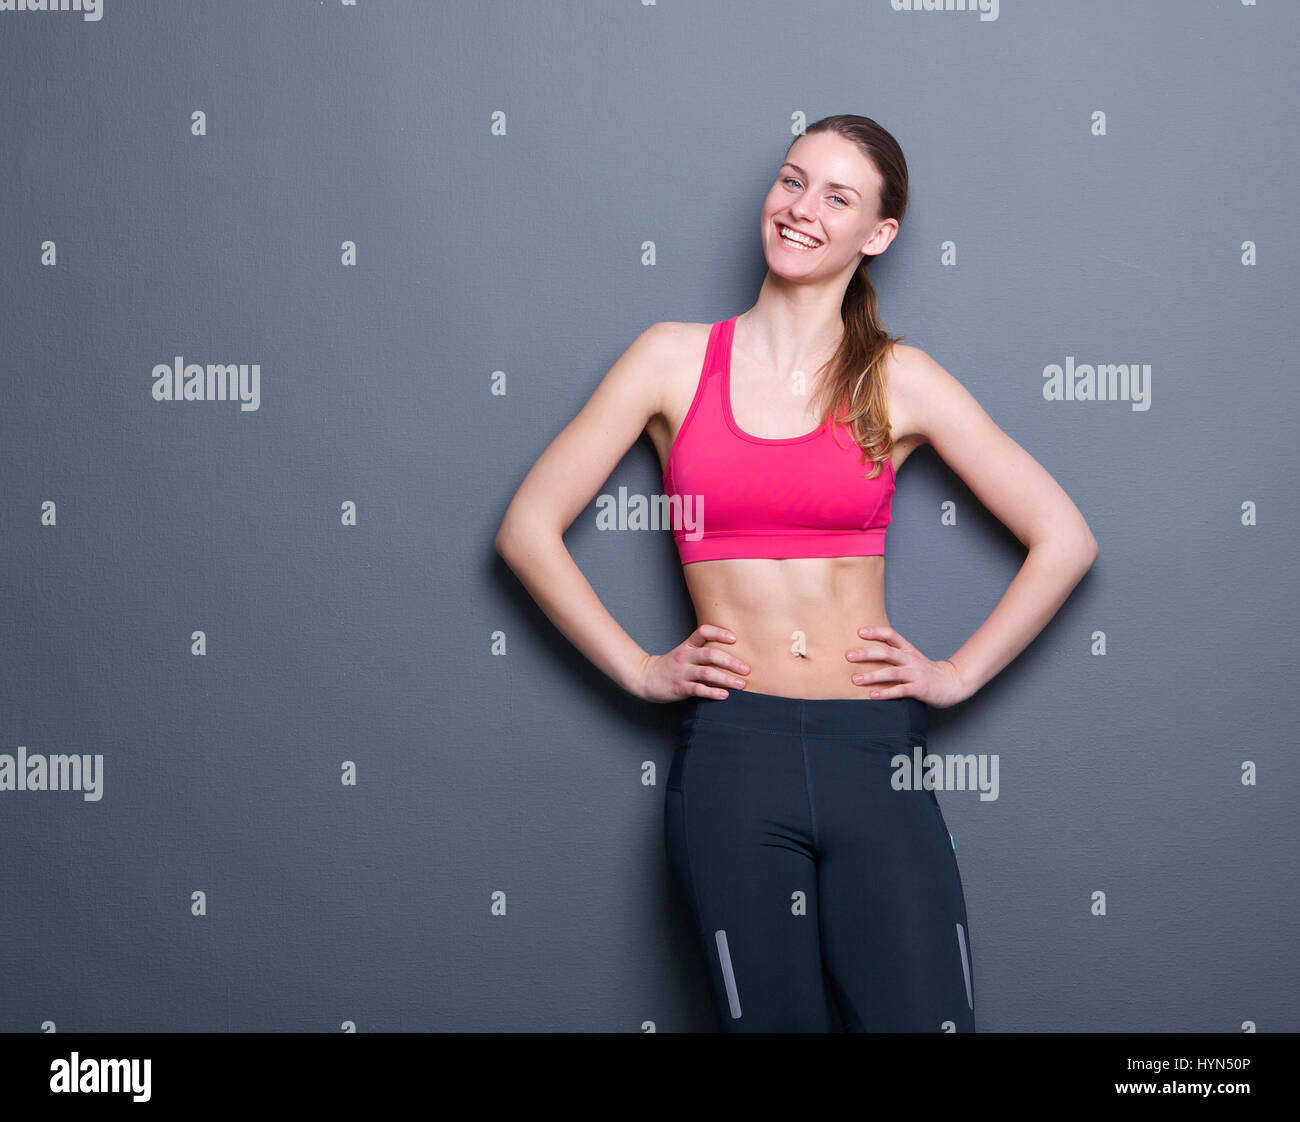 Portrait of a cheerful young woman with slim body figure Stock Photo